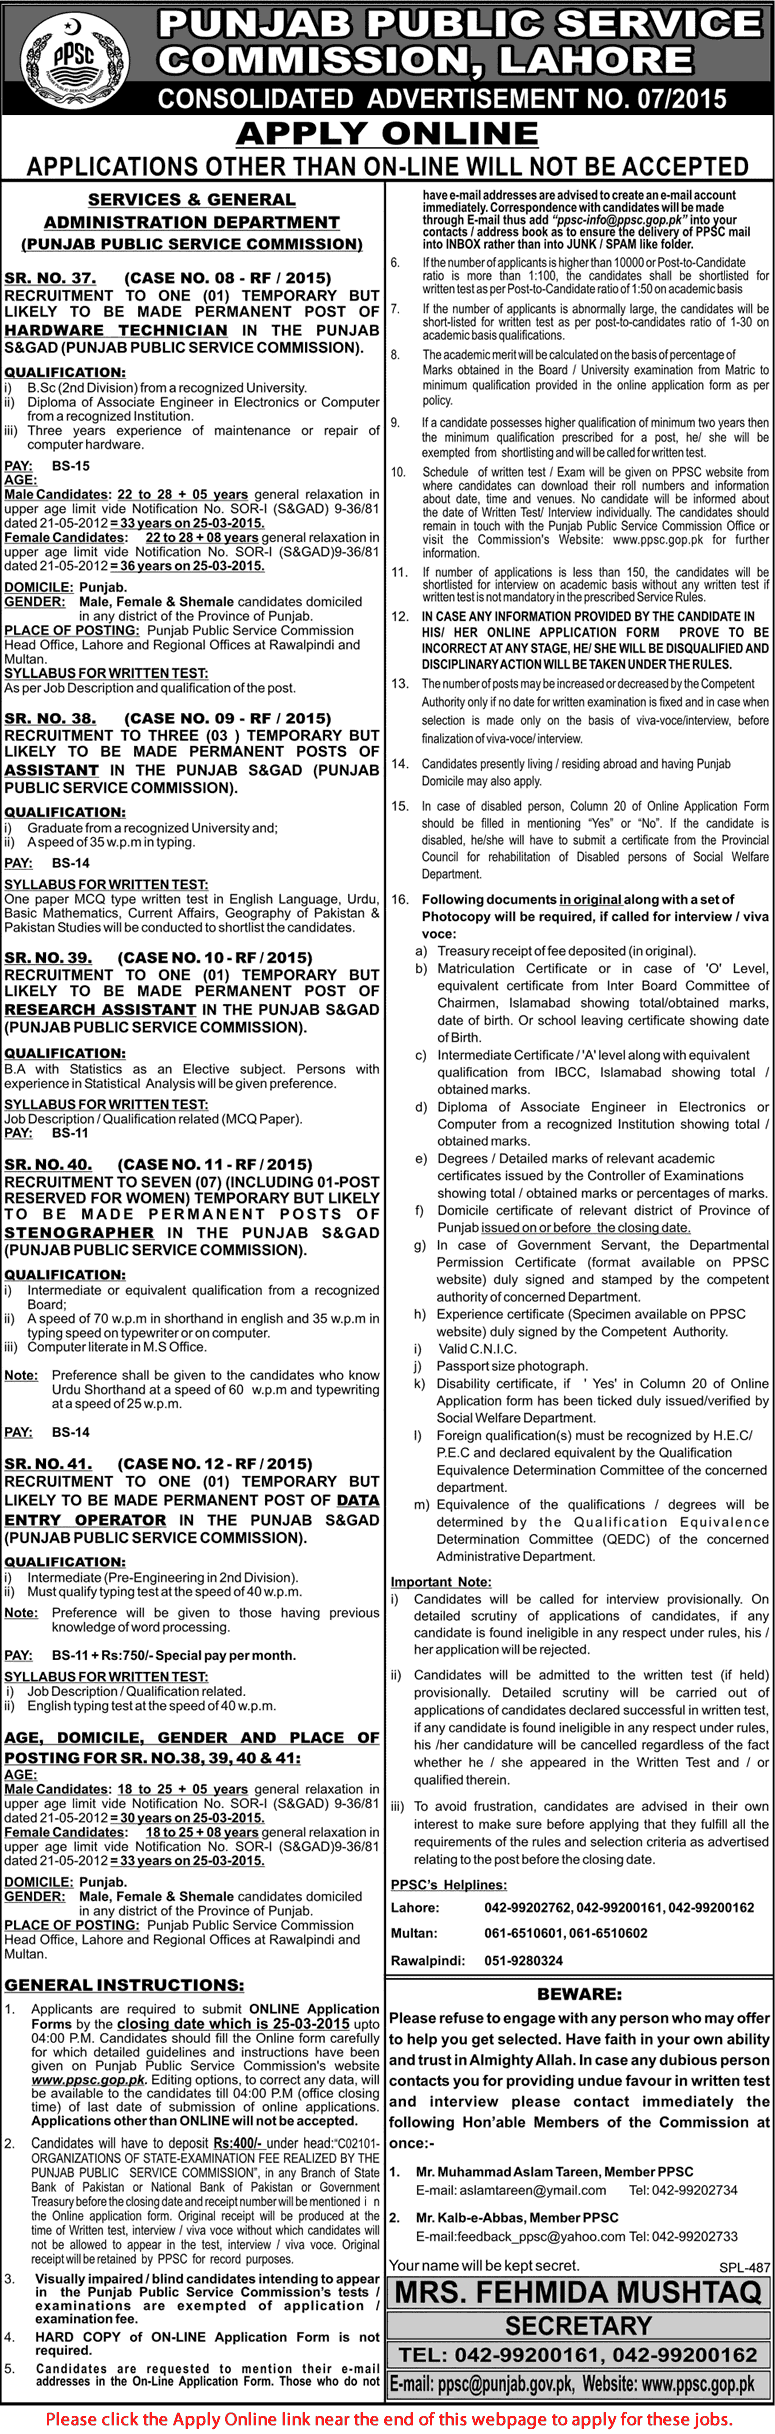 PPSC Jobs March 2015 Apply Online Consolidated Advertisement No 07/2015 7/2015 Latest